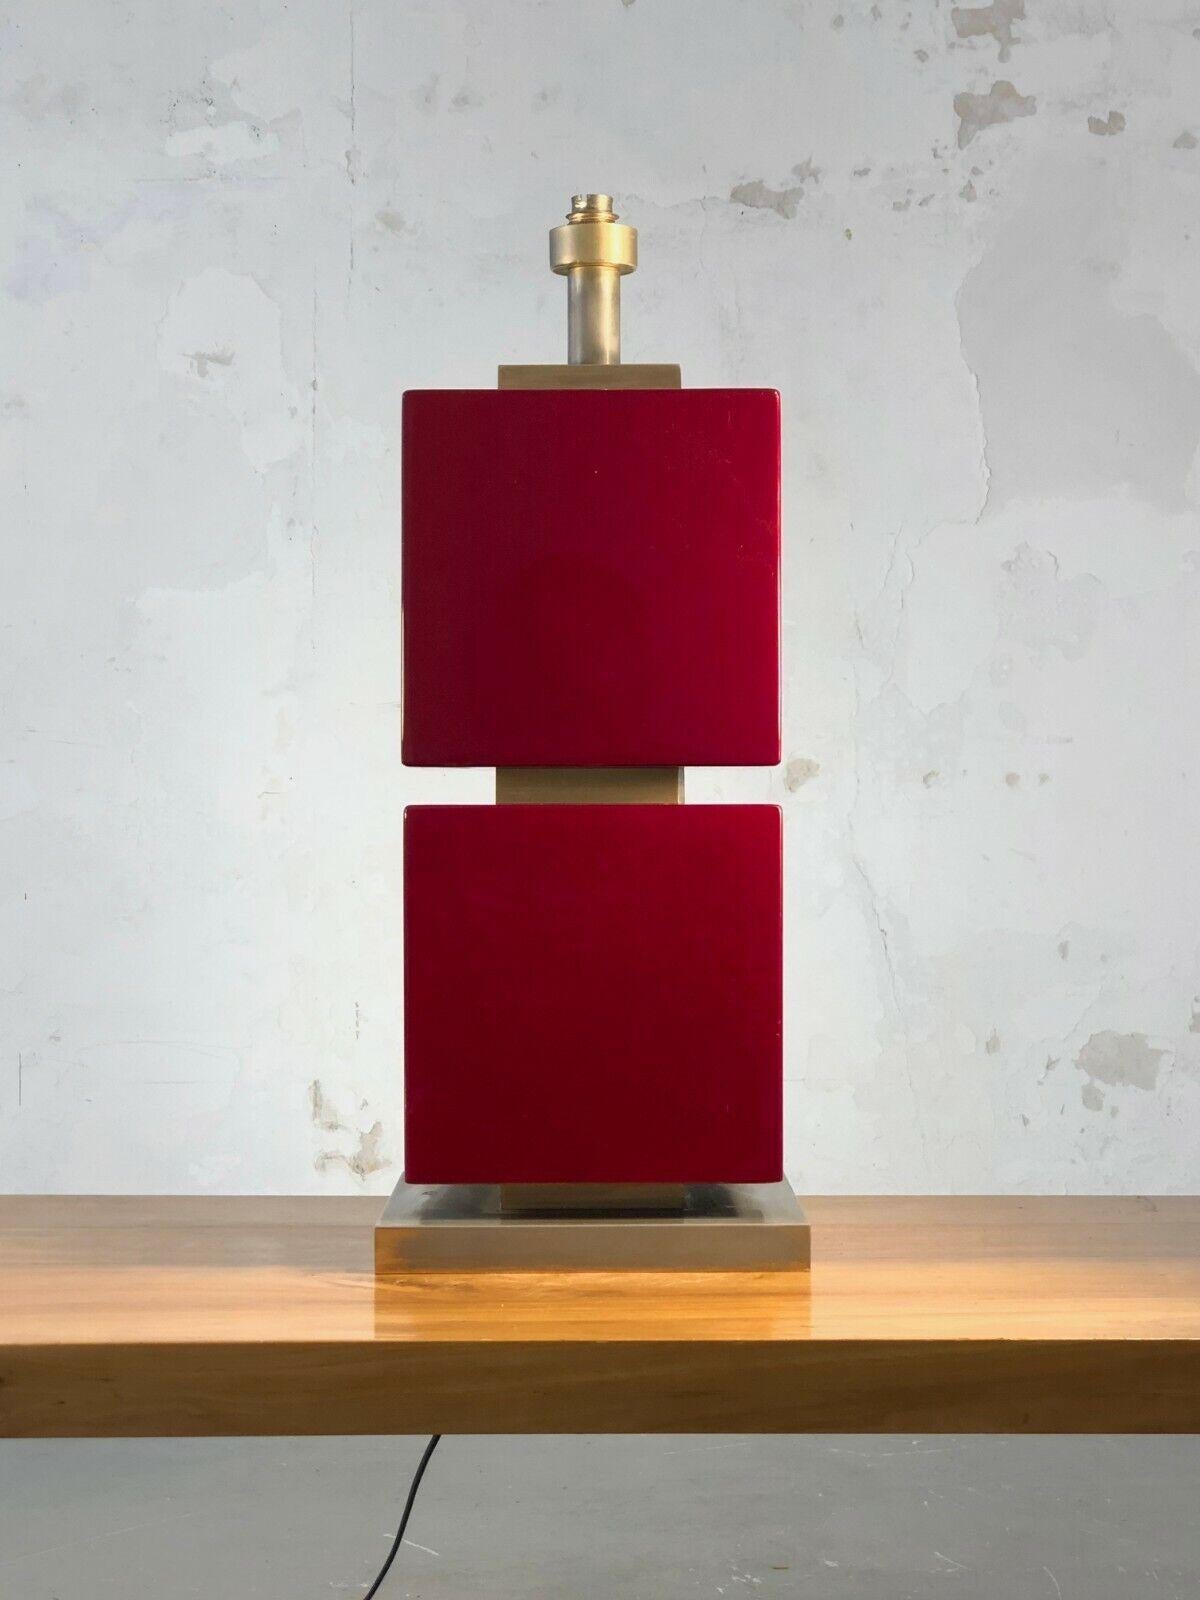 A very large and decorative table lamp (can be used as a floor lamp too), Art-Déco, Neo-Classical, Post-Modernist, with a square section base in golden metal, the body of the lamp being made of 2 large cubes in burgundy lacquered wood, topped with a